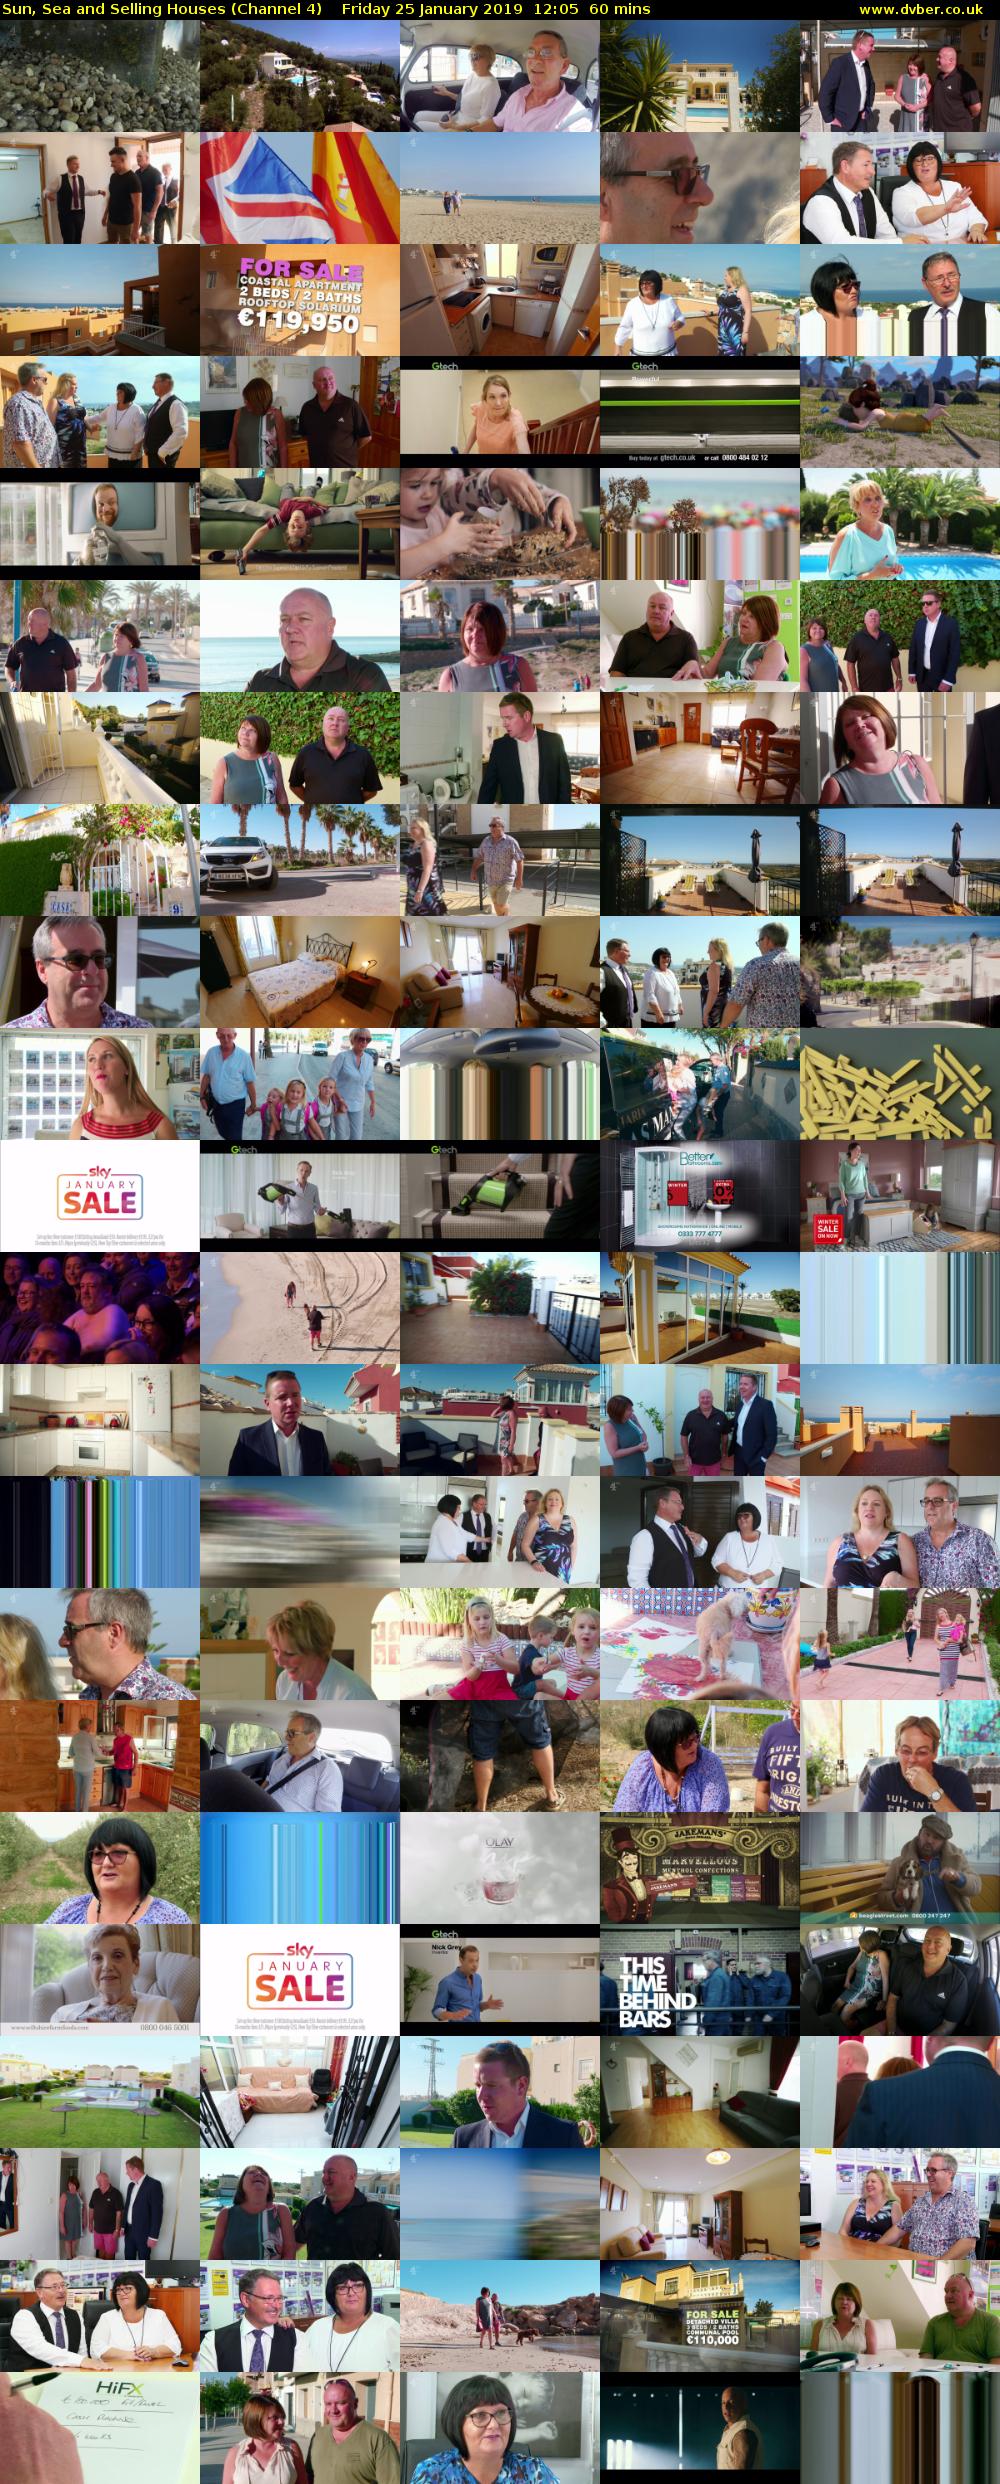 Sun, Sea and Selling Houses (Channel 4) Friday 25 January 2019 12:05 - 13:05